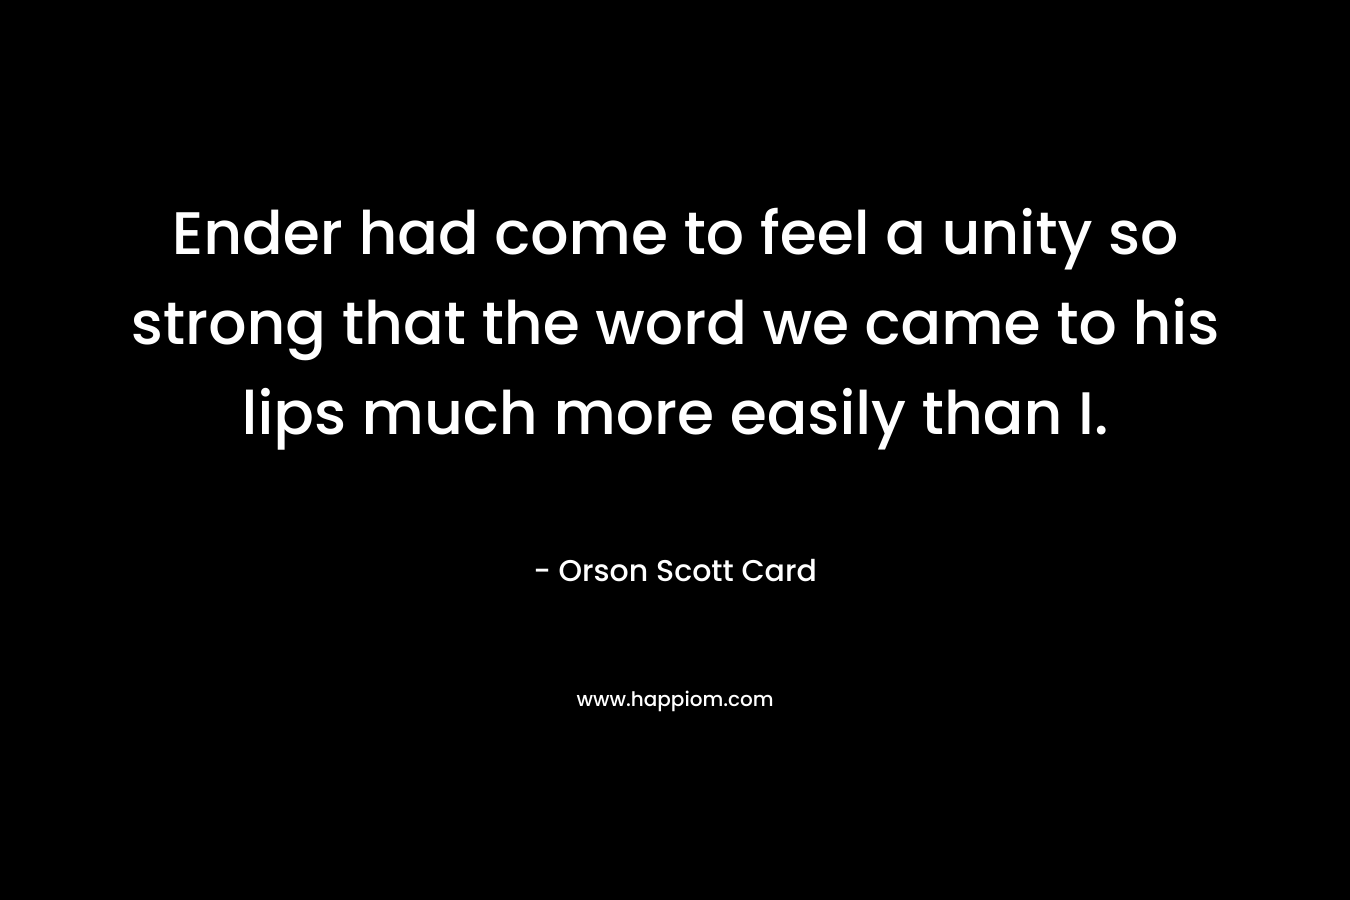 Ender had come to feel a unity so strong that the word we came to his lips much more easily than I. – Orson Scott Card